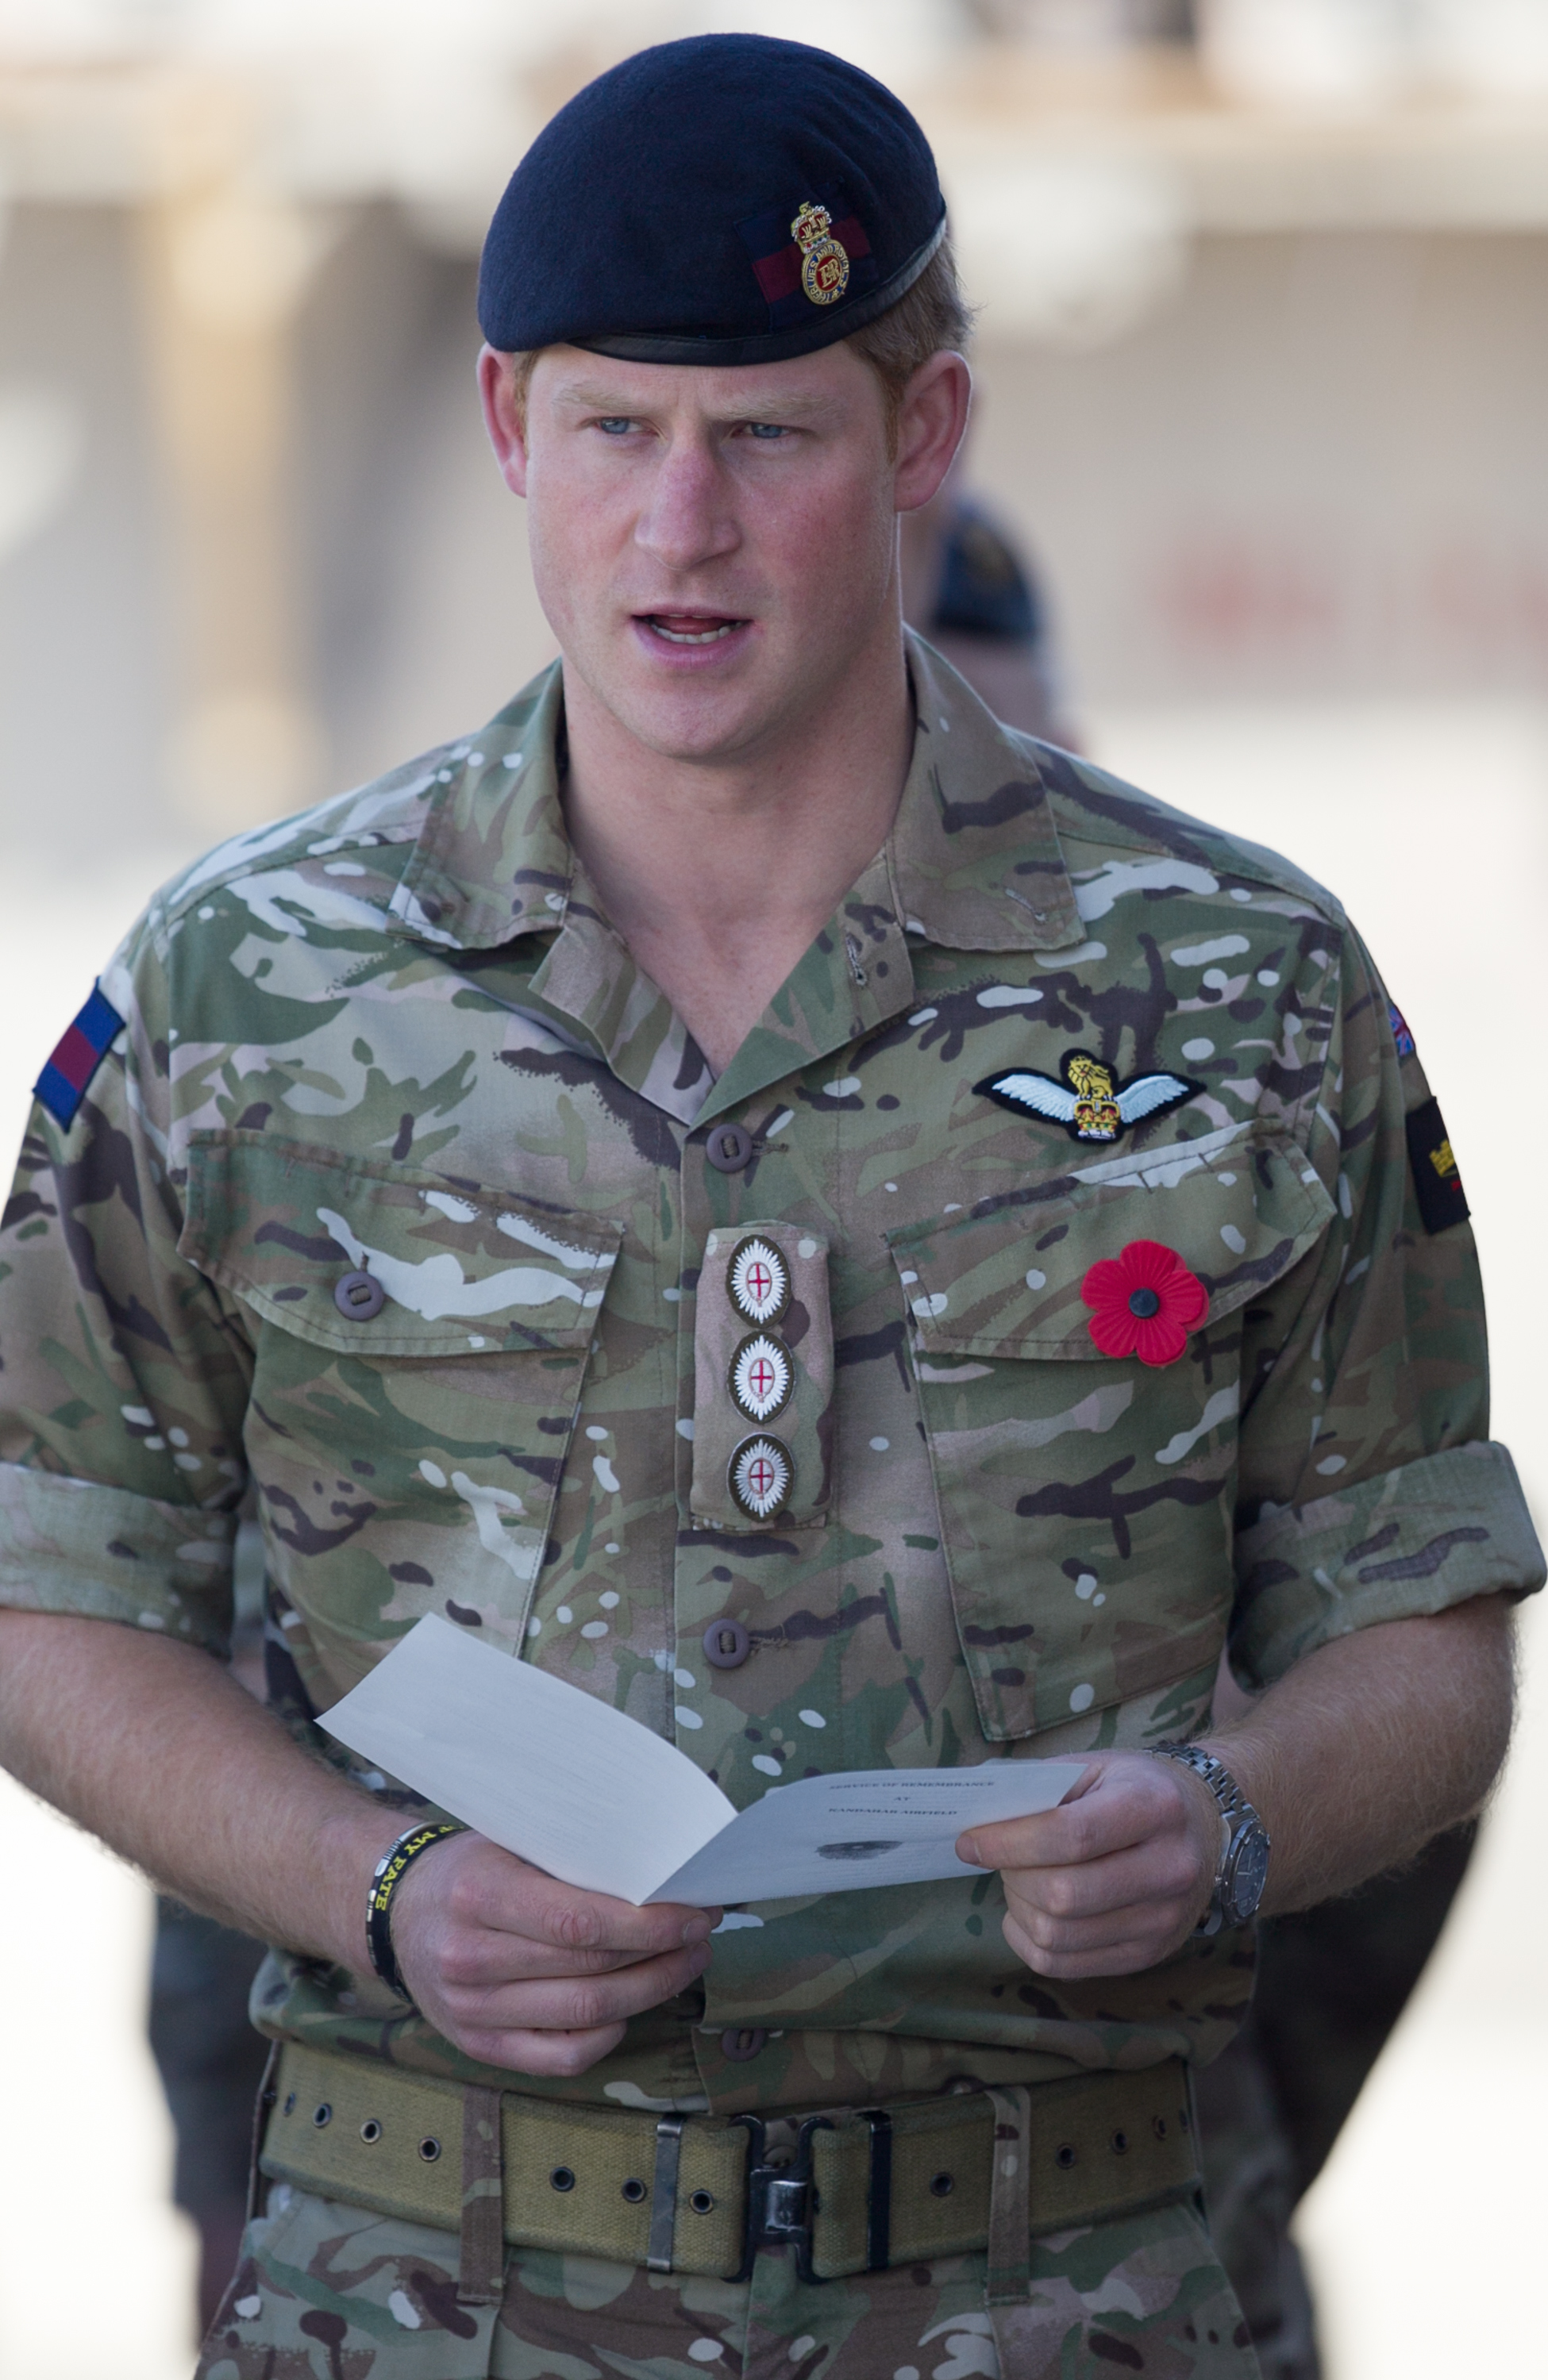 Prince Harry joins British troops and service personal remaining in Afghanistan and also International Security Assistance Force (ISAF) personnel and civilians as they gather for a Remembrance Sunday service at Kandahar Airfield November 9, 2014 in Kandahar, Afghanistan. (Matt Cardy—Getty Images)